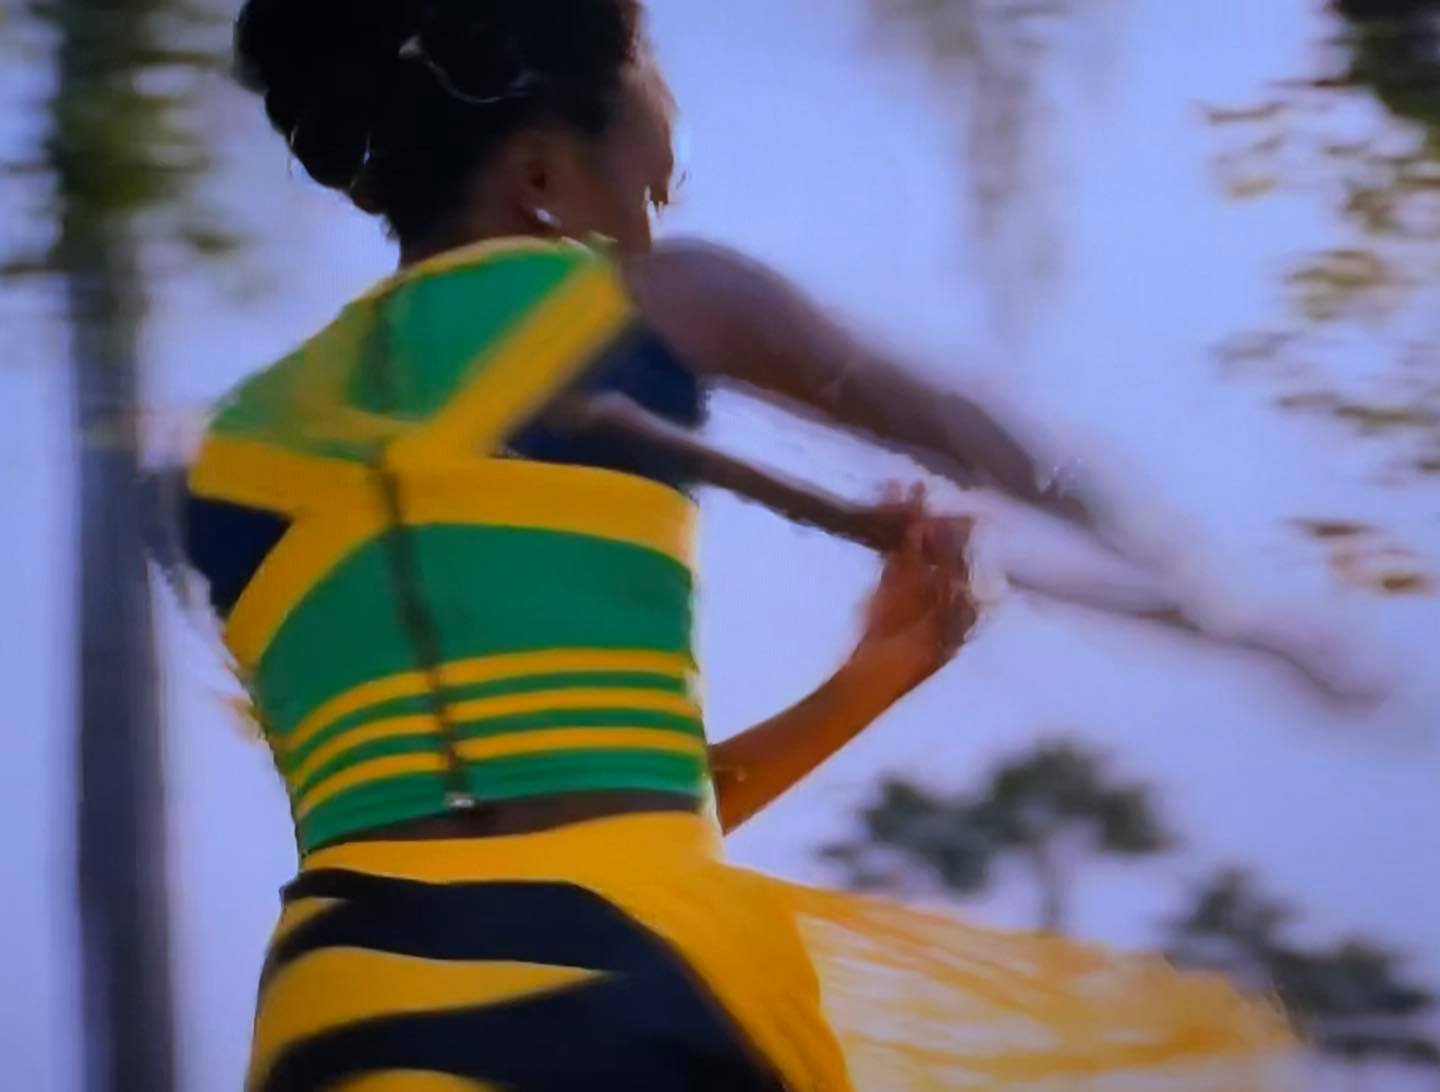 Many Speculate the Jamaican Flag Outfit in Coming 2 America Was a Tribute to Madge Sinclair - Kiki Layne Meeka Akeem Eddie Murphy